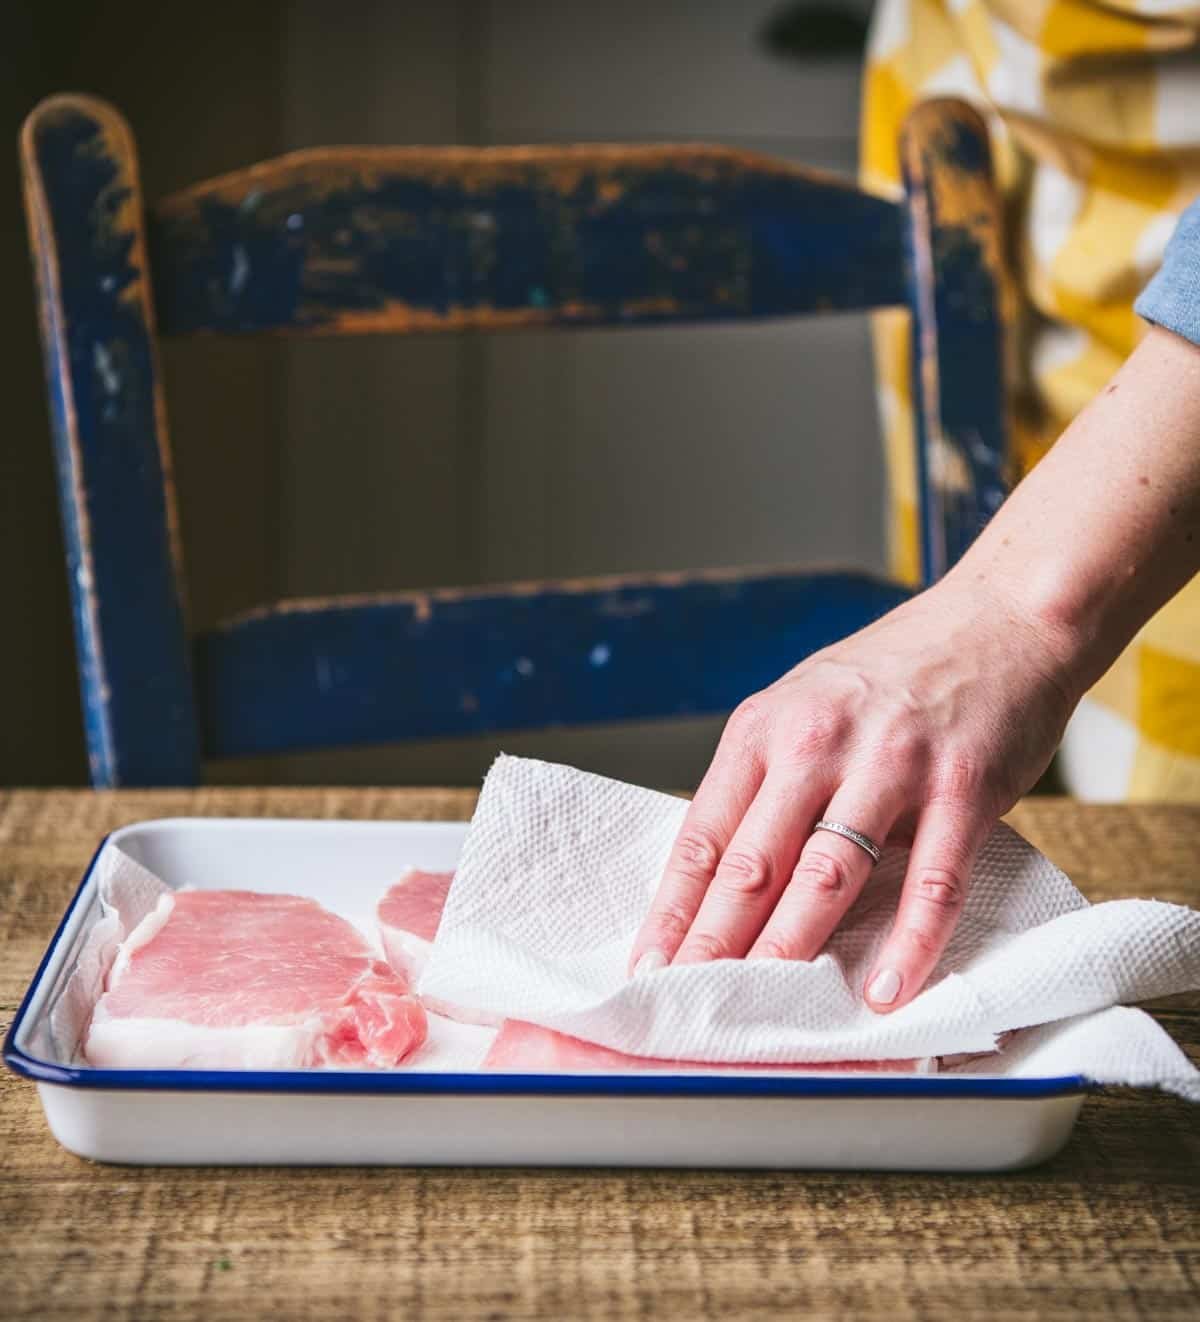 Patting pork chops dry with paper towels.